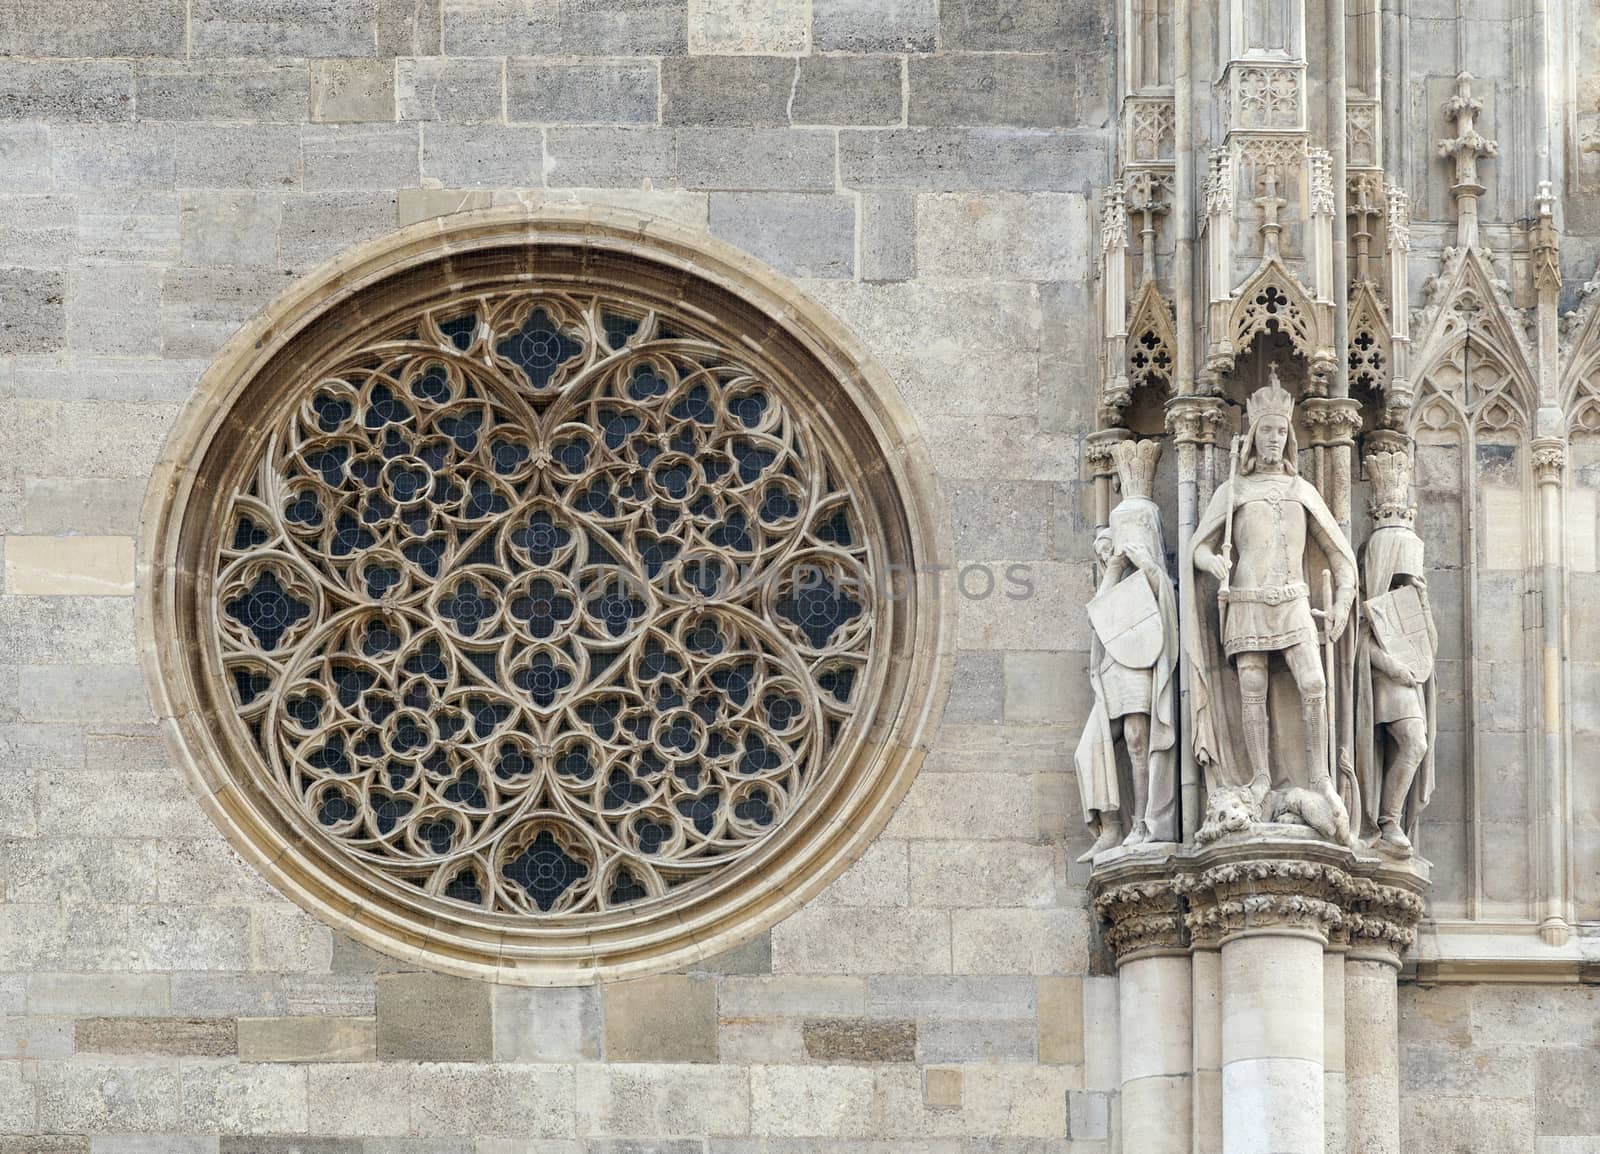 Round gothic window on the facade of the St. Stephen's cathedral, Vienna by Goodday